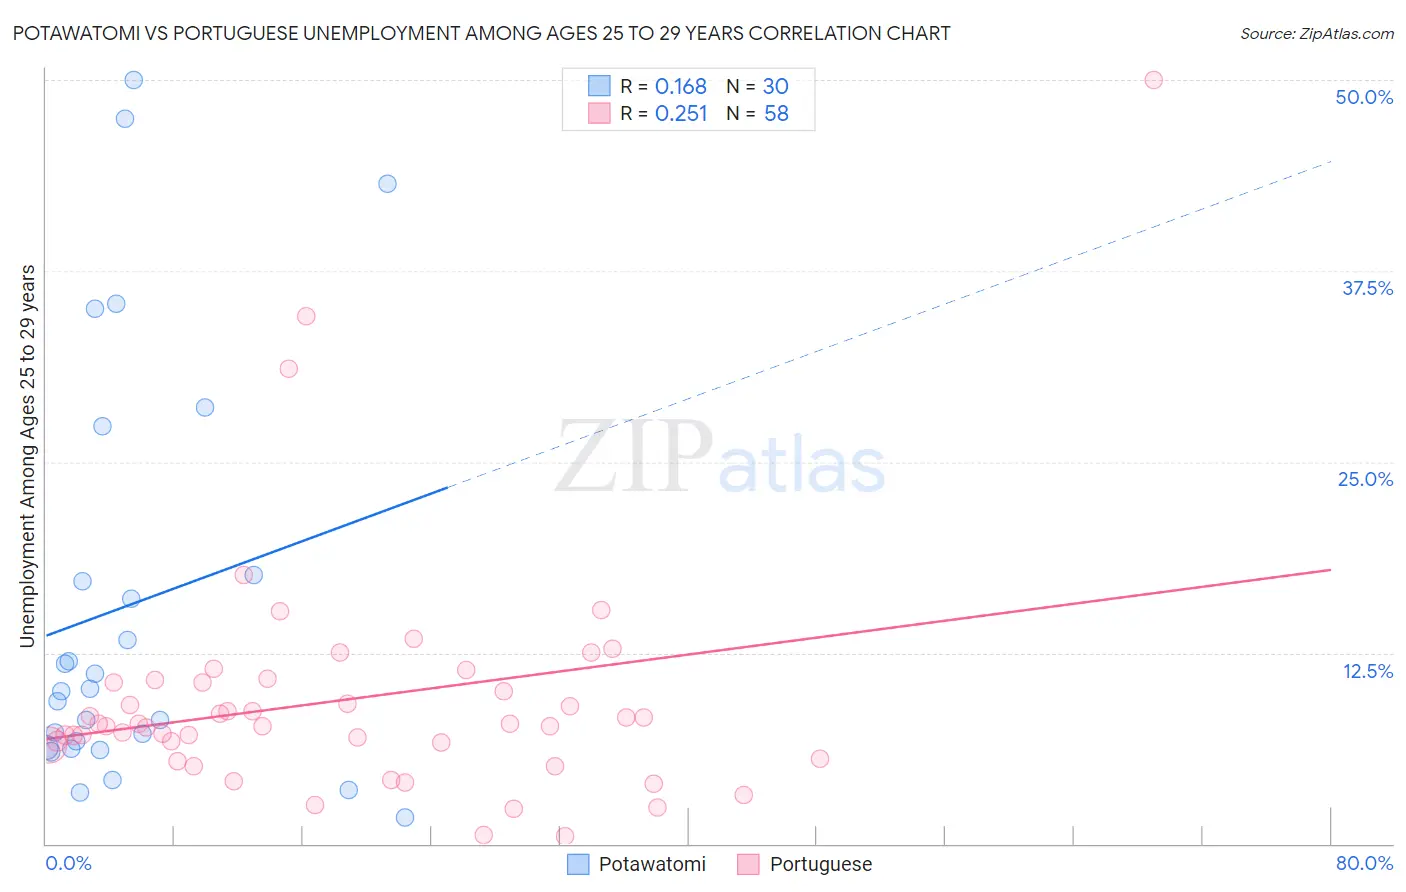 Potawatomi vs Portuguese Unemployment Among Ages 25 to 29 years